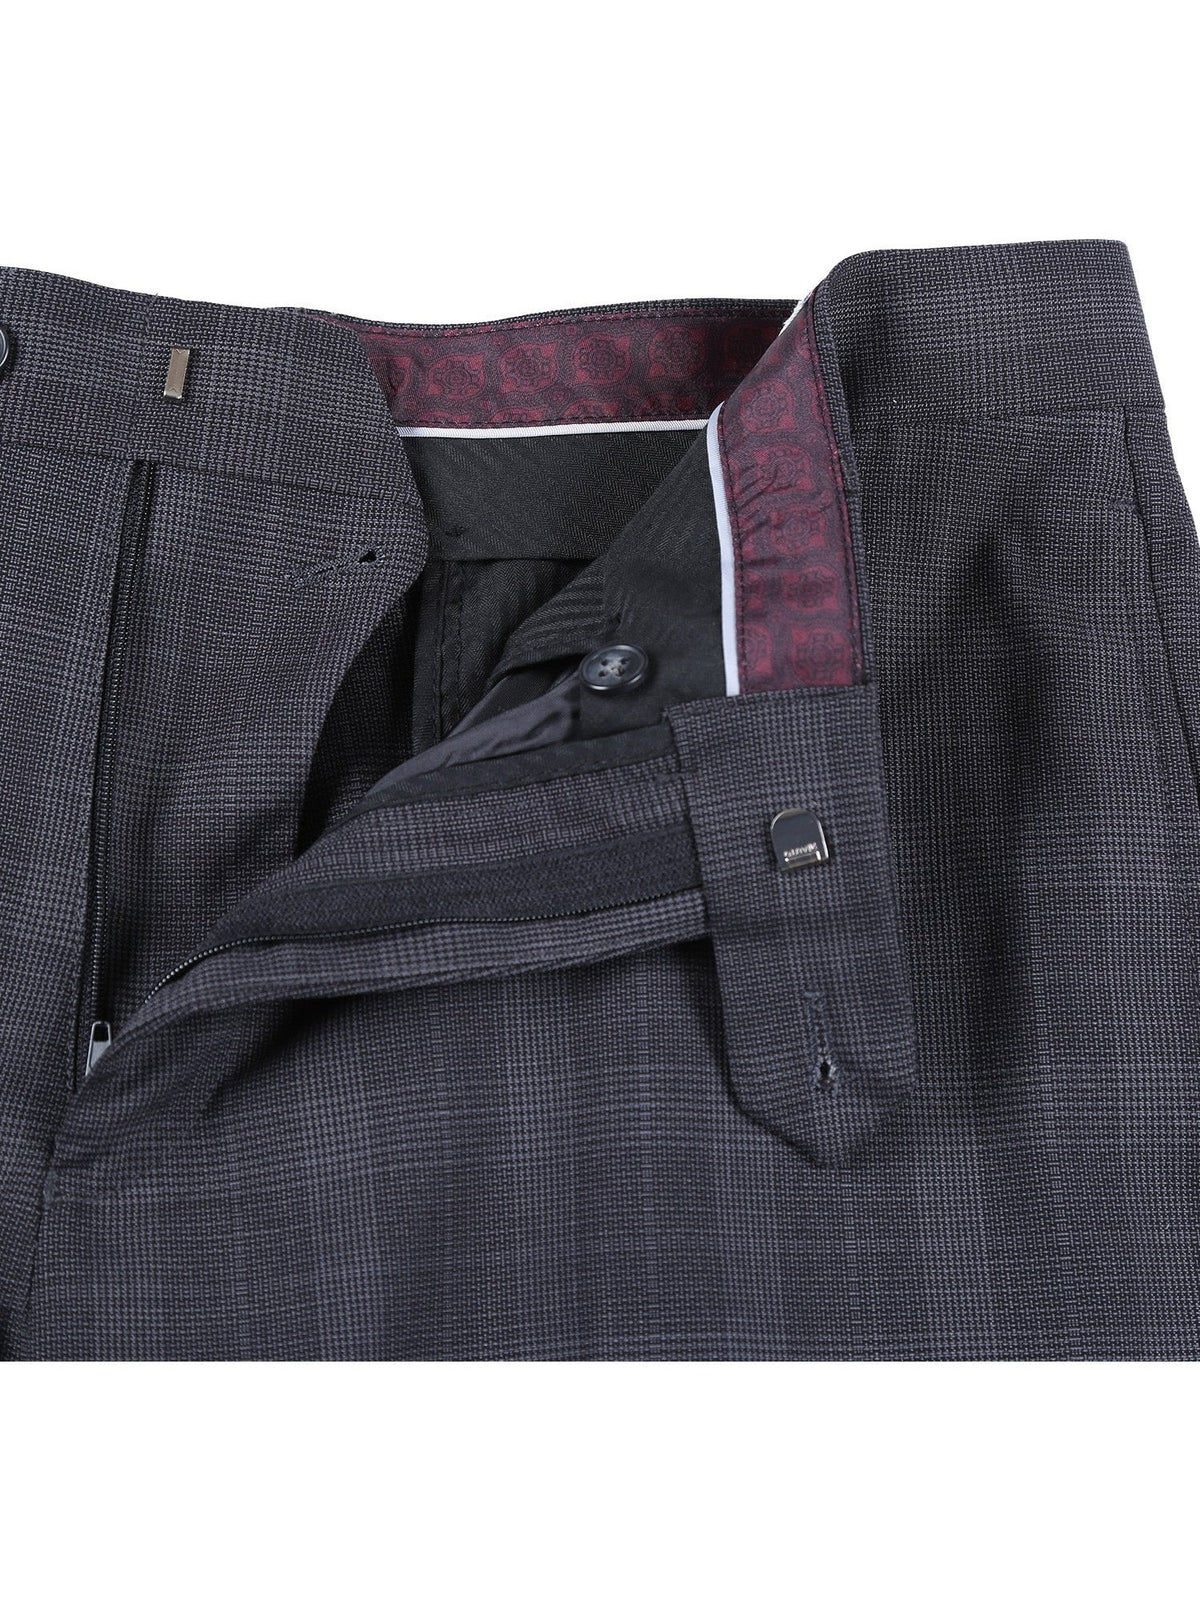 English Laundry Single Breasted Two Button Checked Notch Lapel Suit